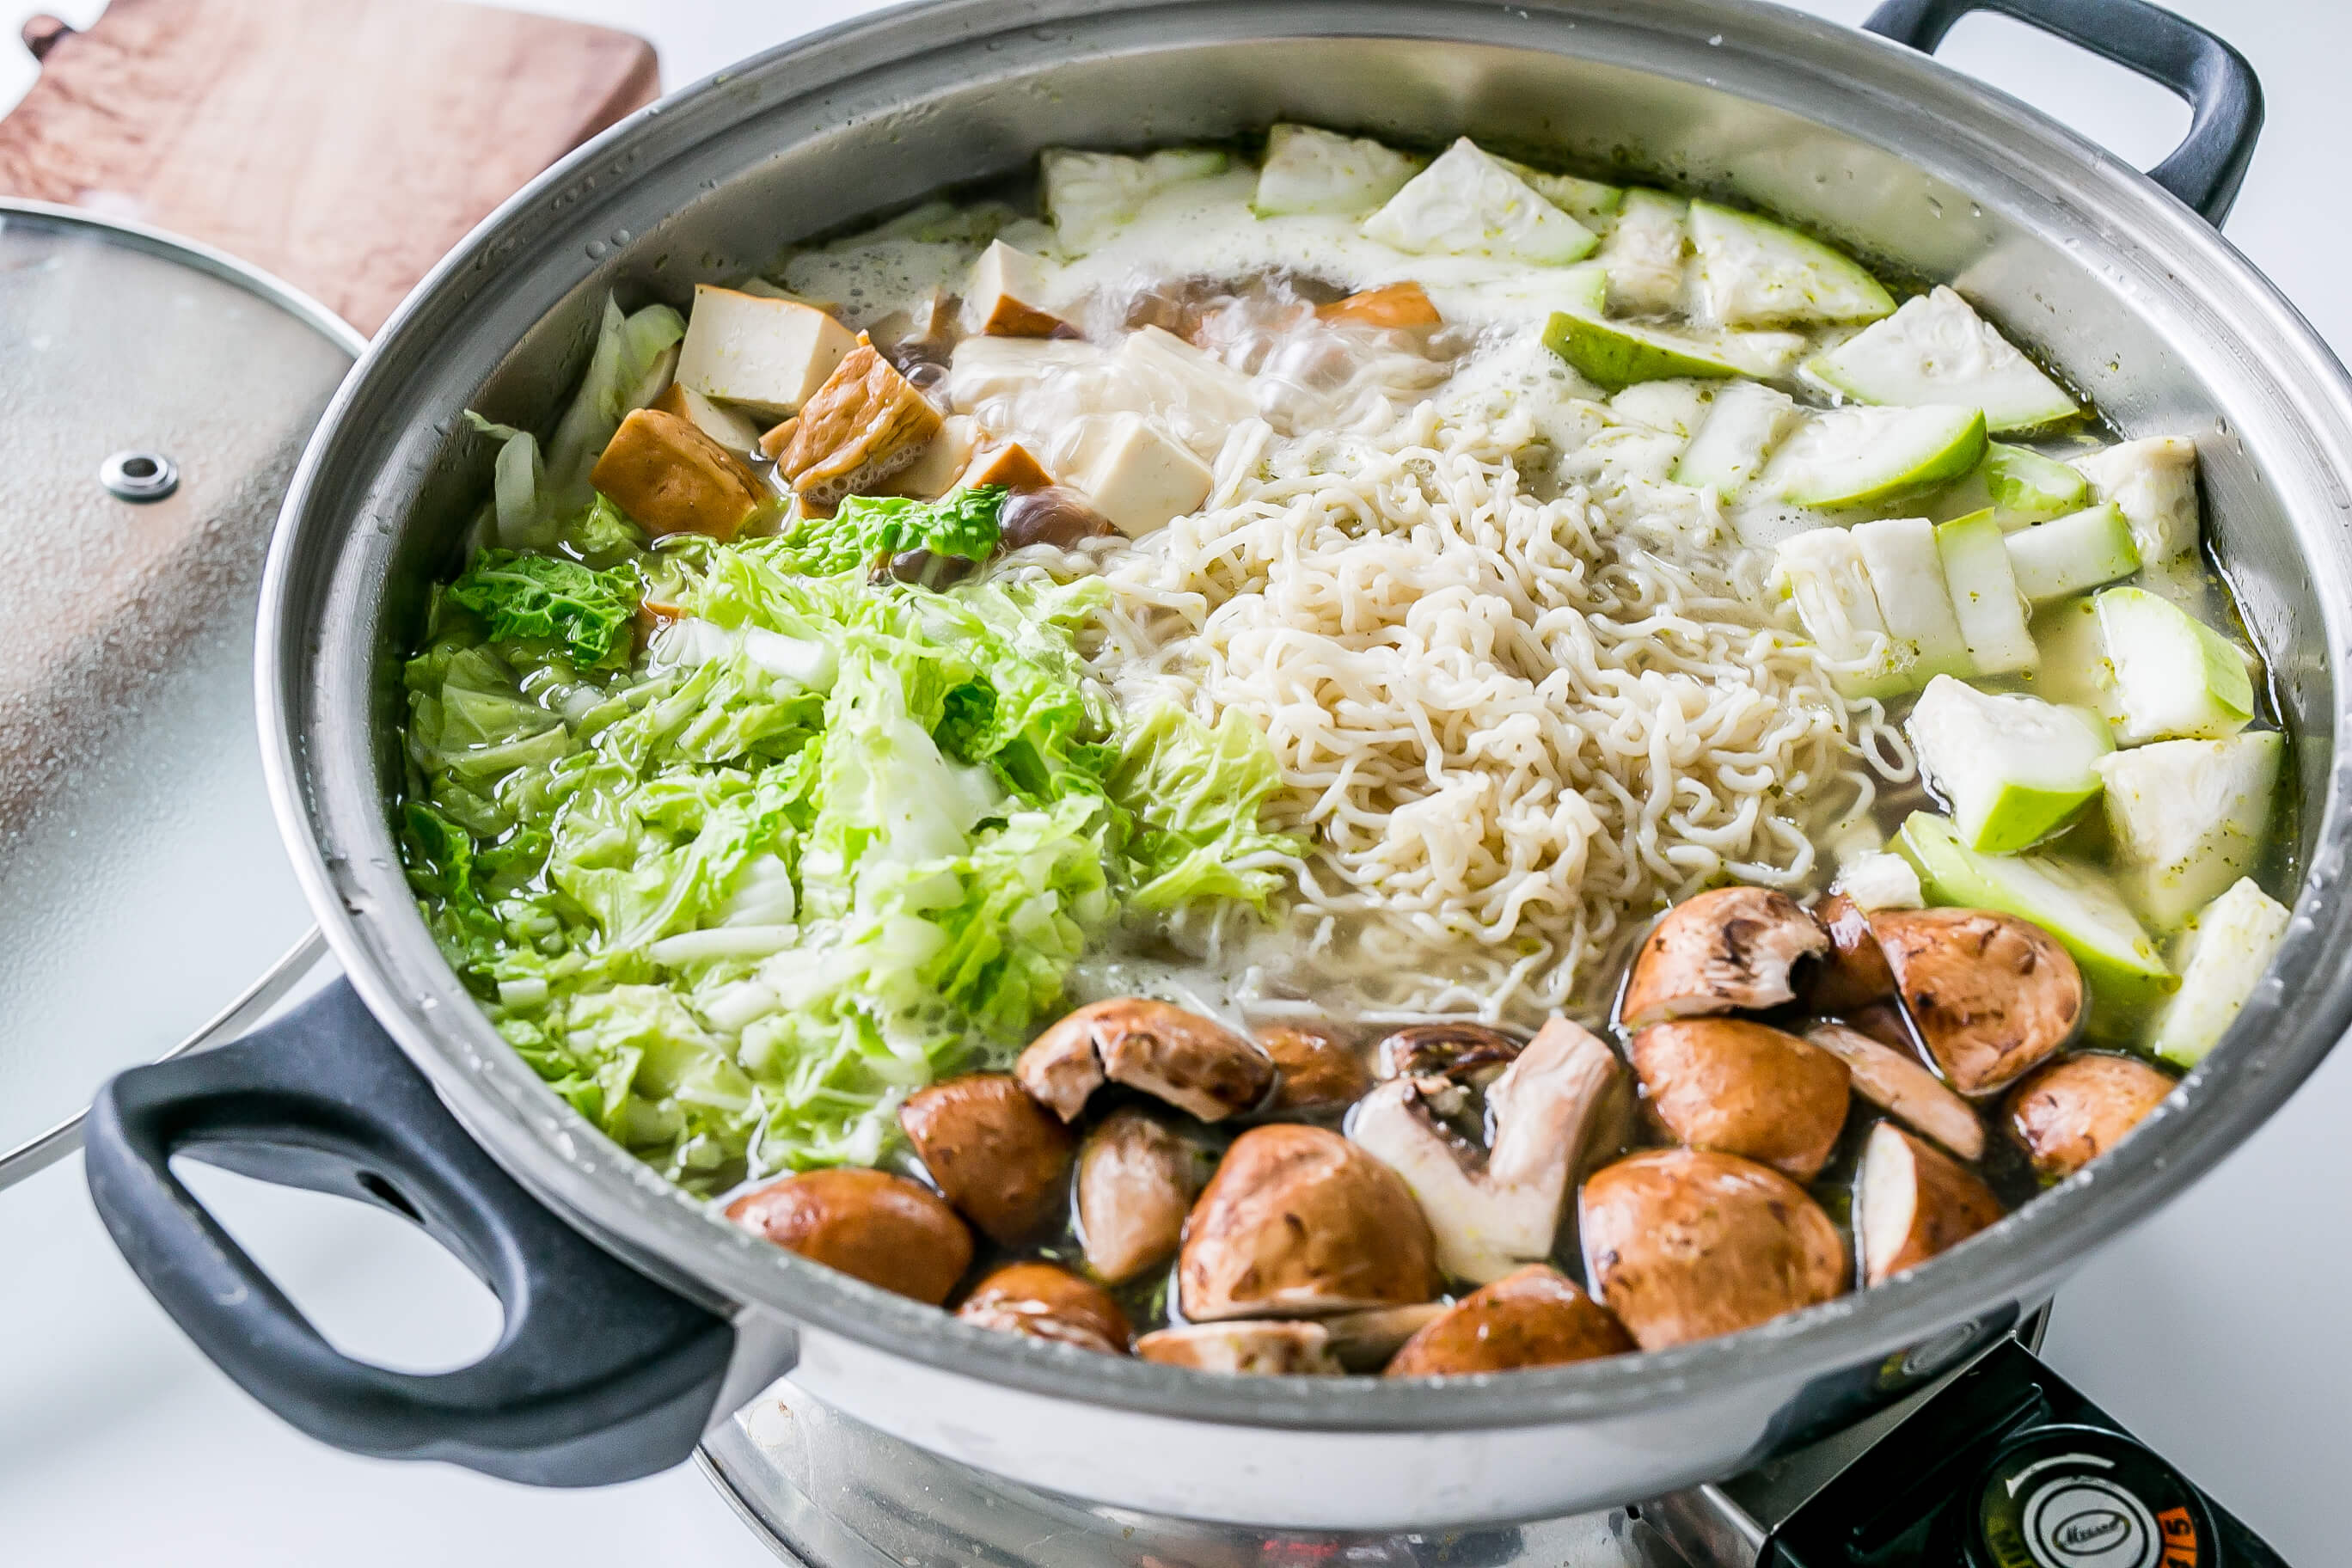 20 Low-Fat Oil-Free Meals Your Clients Will Love: Tofu & Veggie Hot Pot